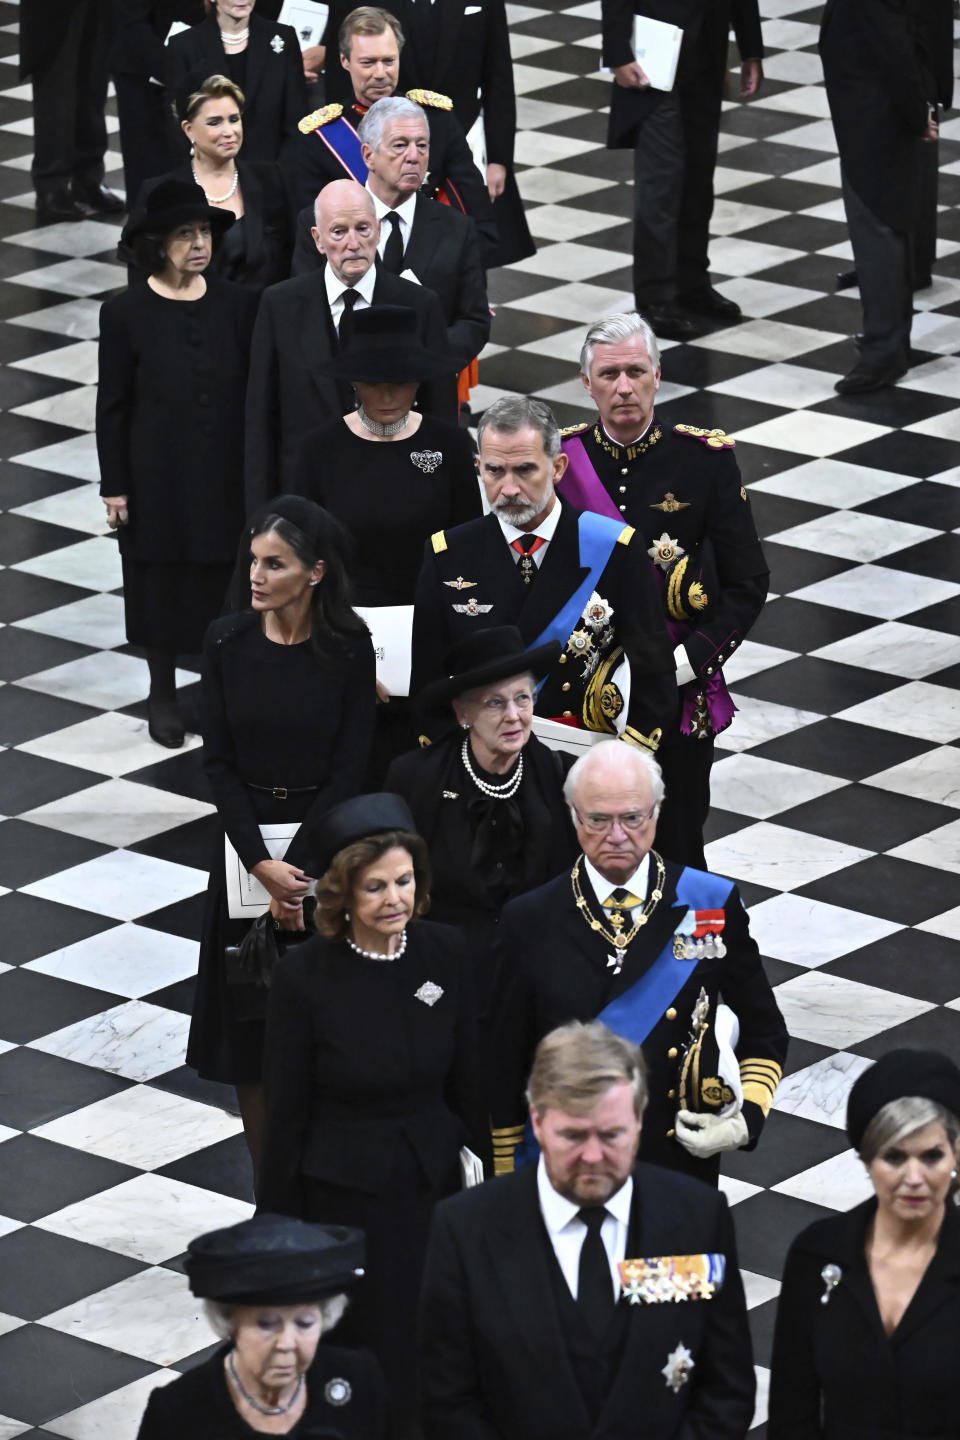 FILE - Netherlands' King Willem-Alexander, lower center, Queen Maxima, lower right, and former queen Beatrix, lower left, Sweden's Queen Silvia, 2nd row left, and King Carl Gustav XVI, 2nd row right, Denmark's Queen Margrethe II, center, Spain's King Felipe VI, center right, and Queen Letizia, Queen Mathilde of Belgium, 5th row left, and King Philippe, 5th row right, attend the funeral of Queen Elizabeth II in Westminster Abbey in central London, Monday Sept. 19, 2022. Denmark’s Queen Margrethe II has tested positive for the coronavirus after attending the funeral of Britain’s Queen Elizabeth II. The Danish royal palace said Wednesday, Sept. 21, 2022 that the 82-year-old Margrethe canceled her official duties after the Tuesday night test. she previously tested positive for the virus in February. (Ben Stansall/Pool via AP, File)